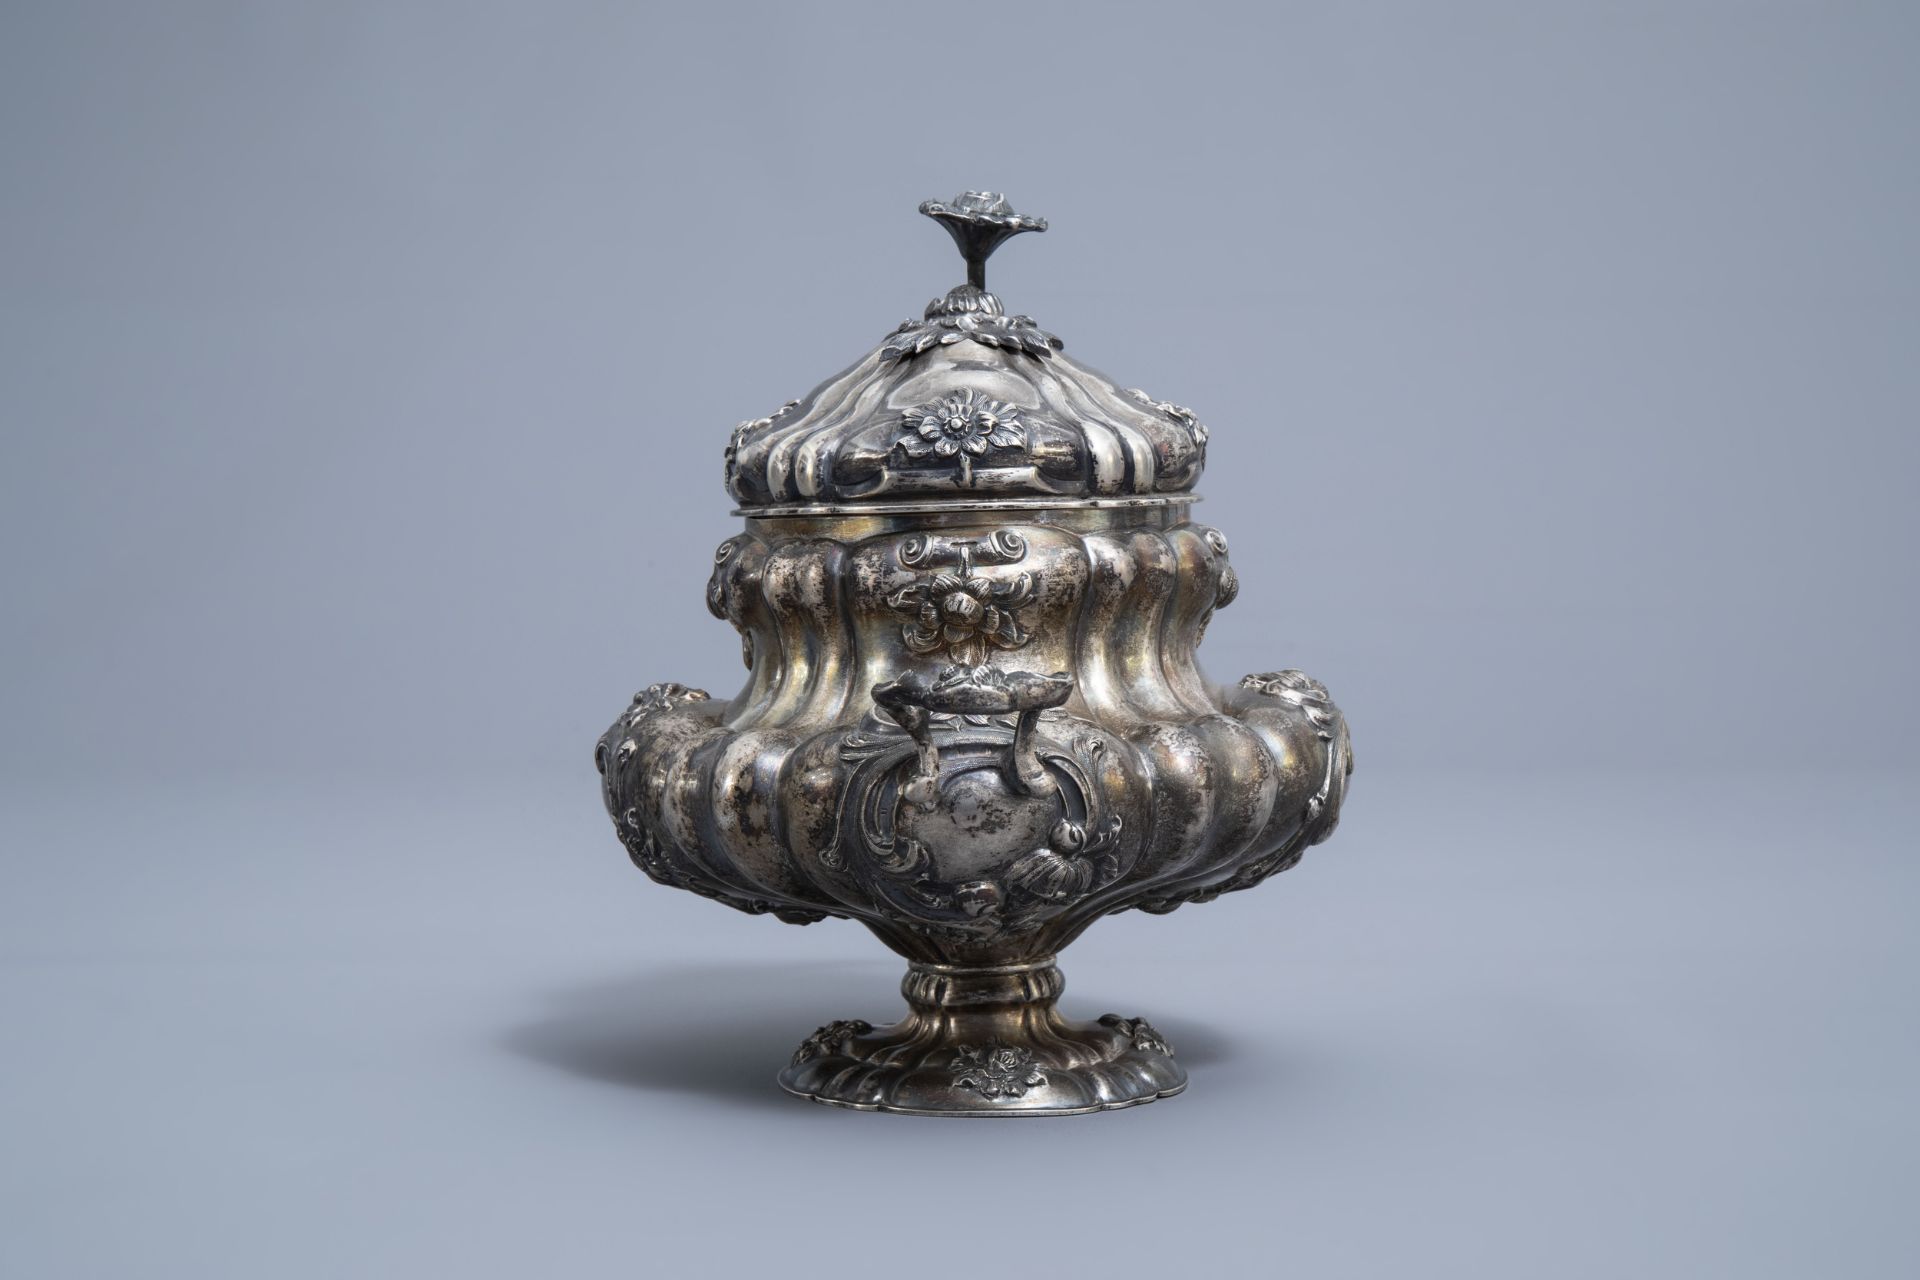 A Belgian silver sugar bowl with relief design, mark Wolfers, 833/000, Brussels, 19th C. - Image 4 of 11